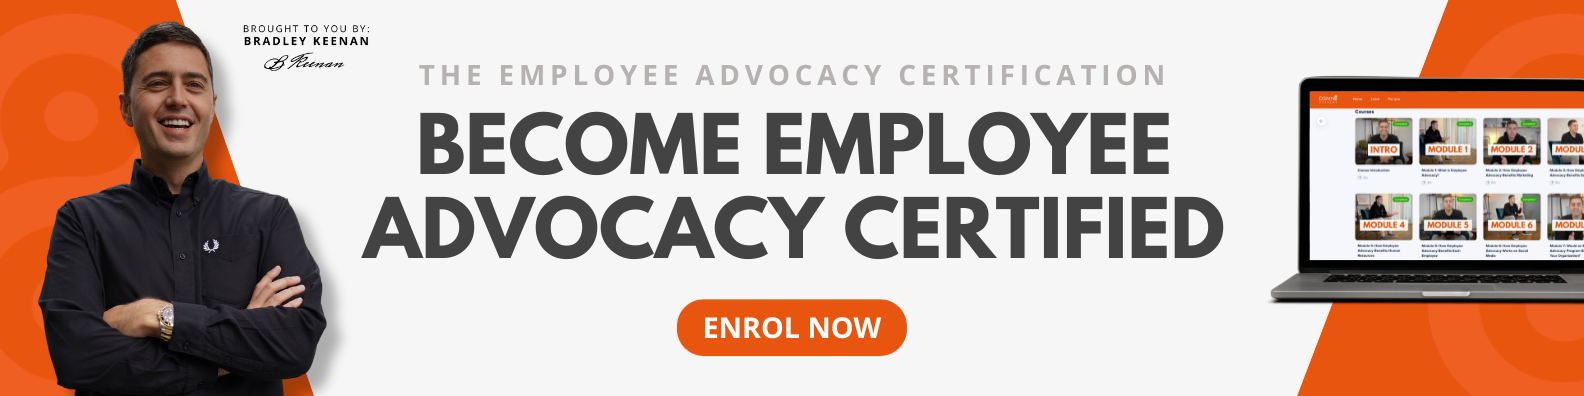 Become Employee Advocacy Certified